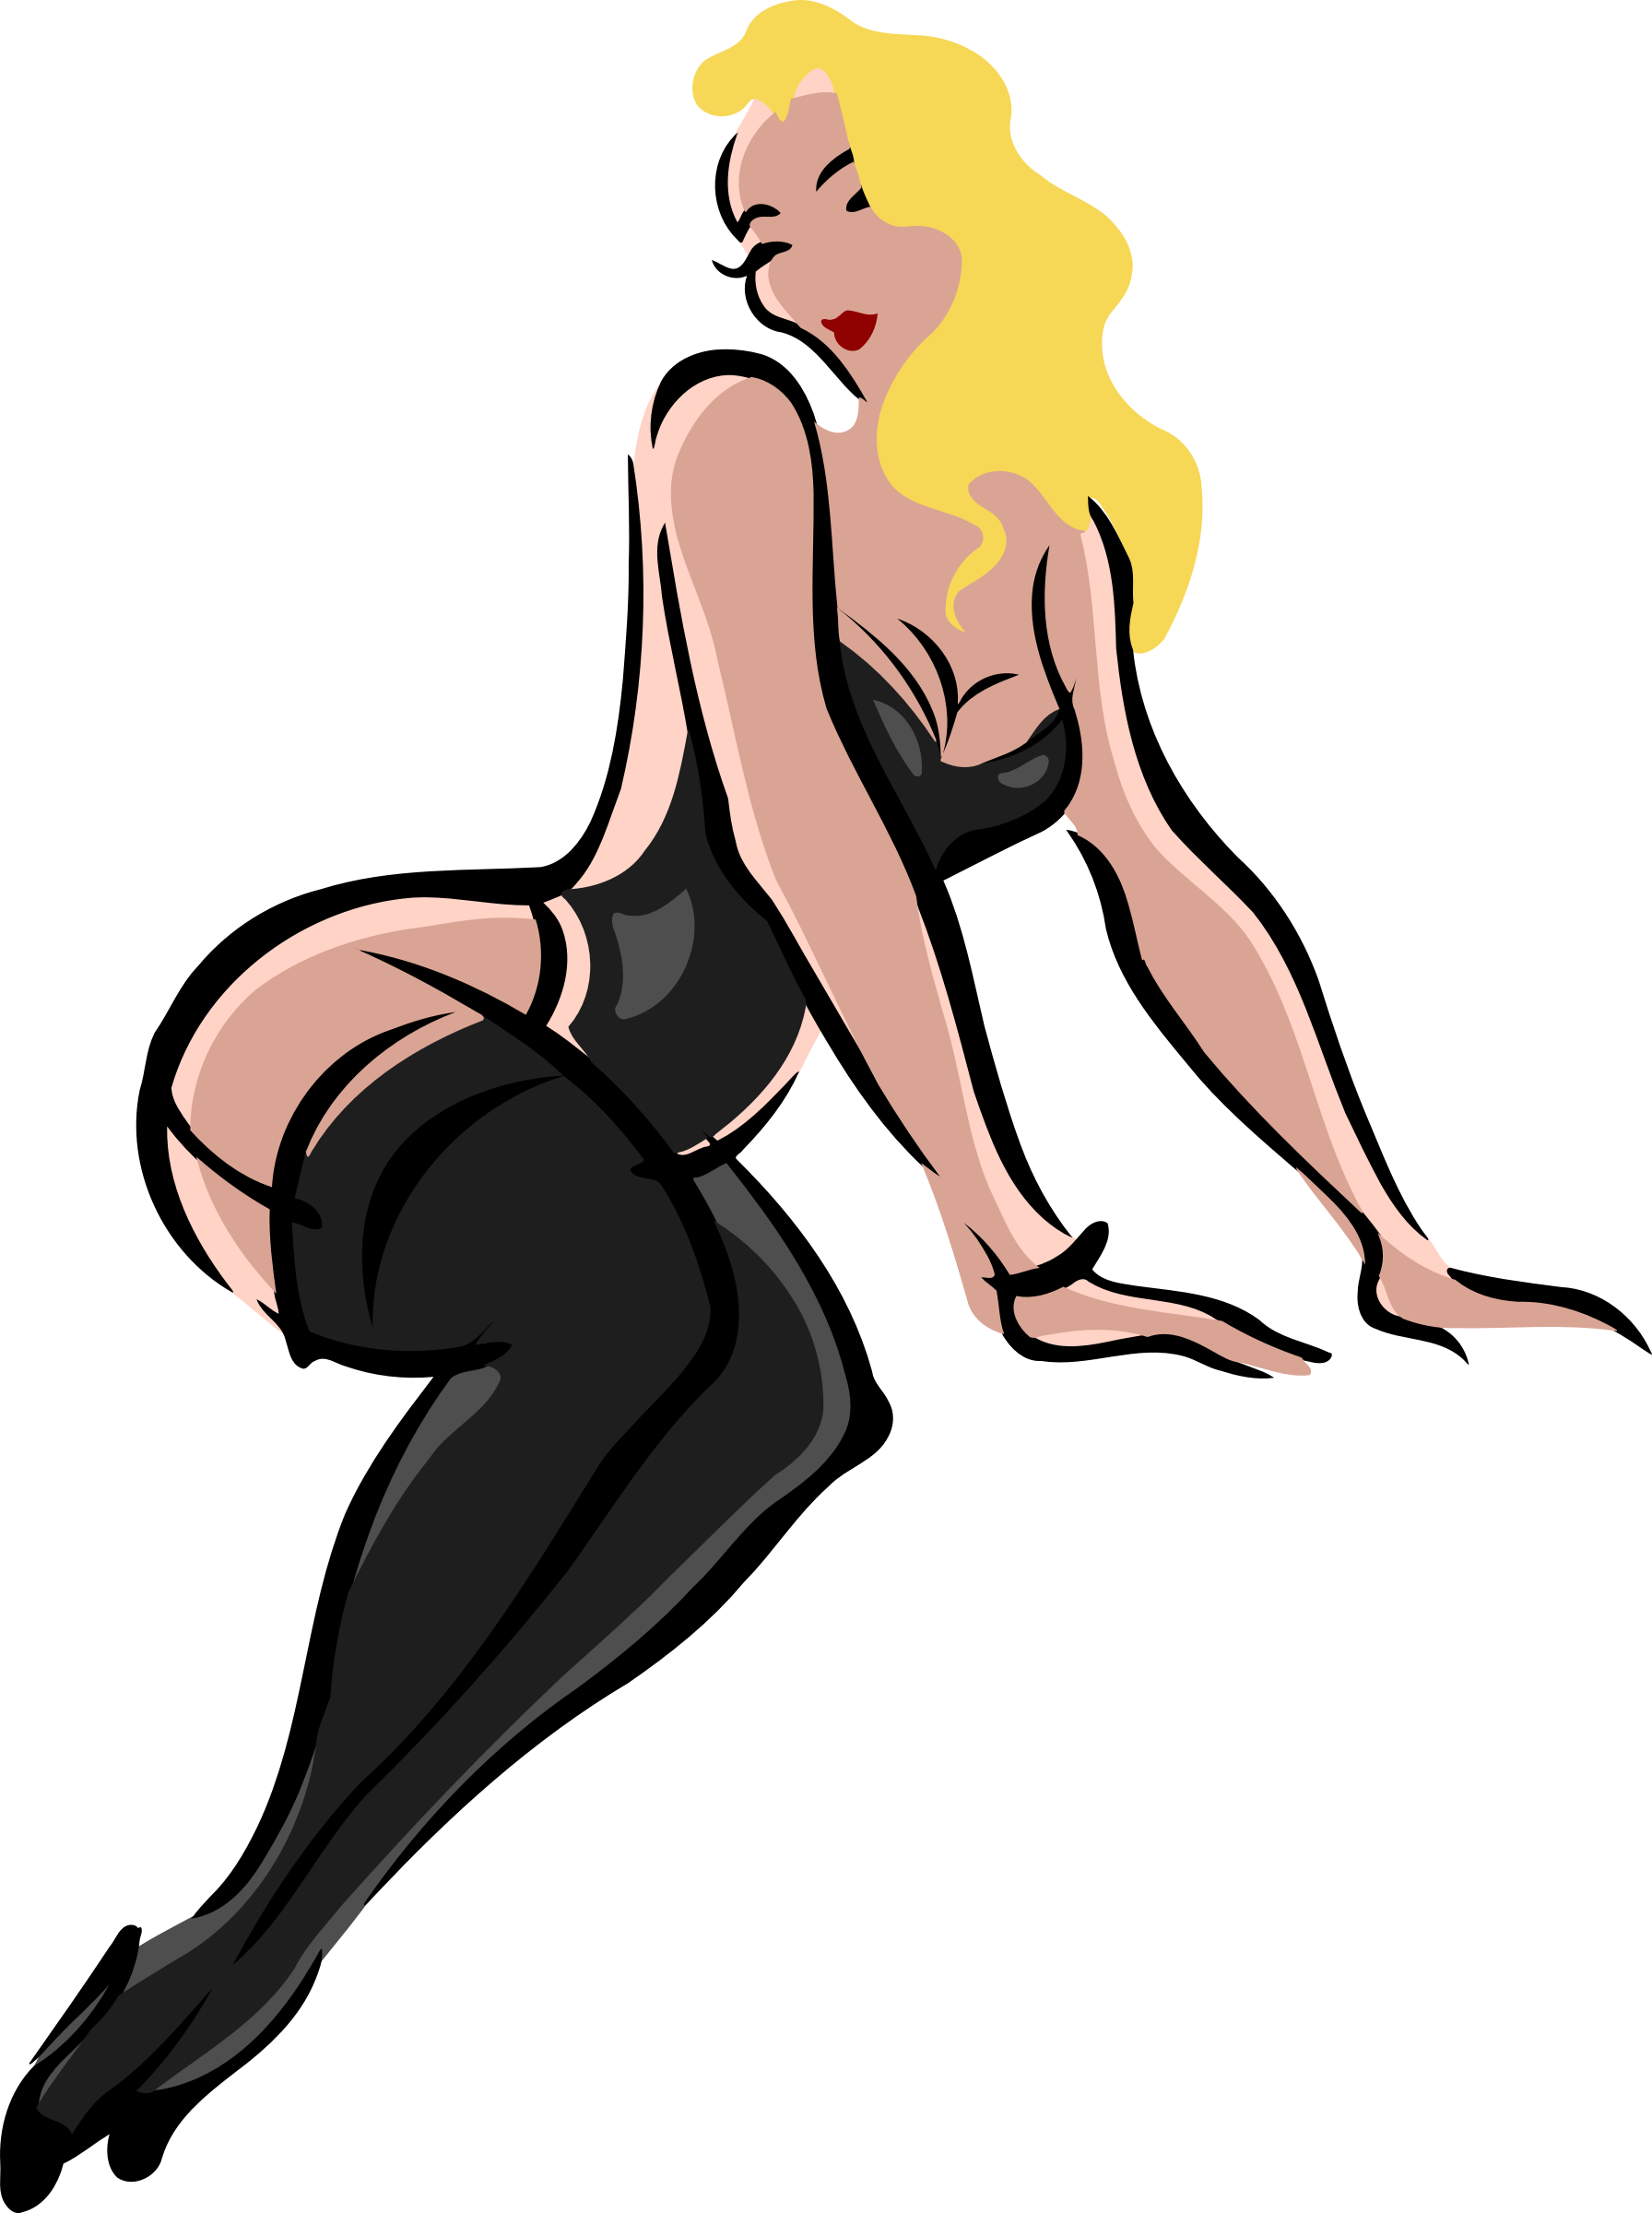 Big Image - Clipart Of A Sexy Girl (1792x2400)